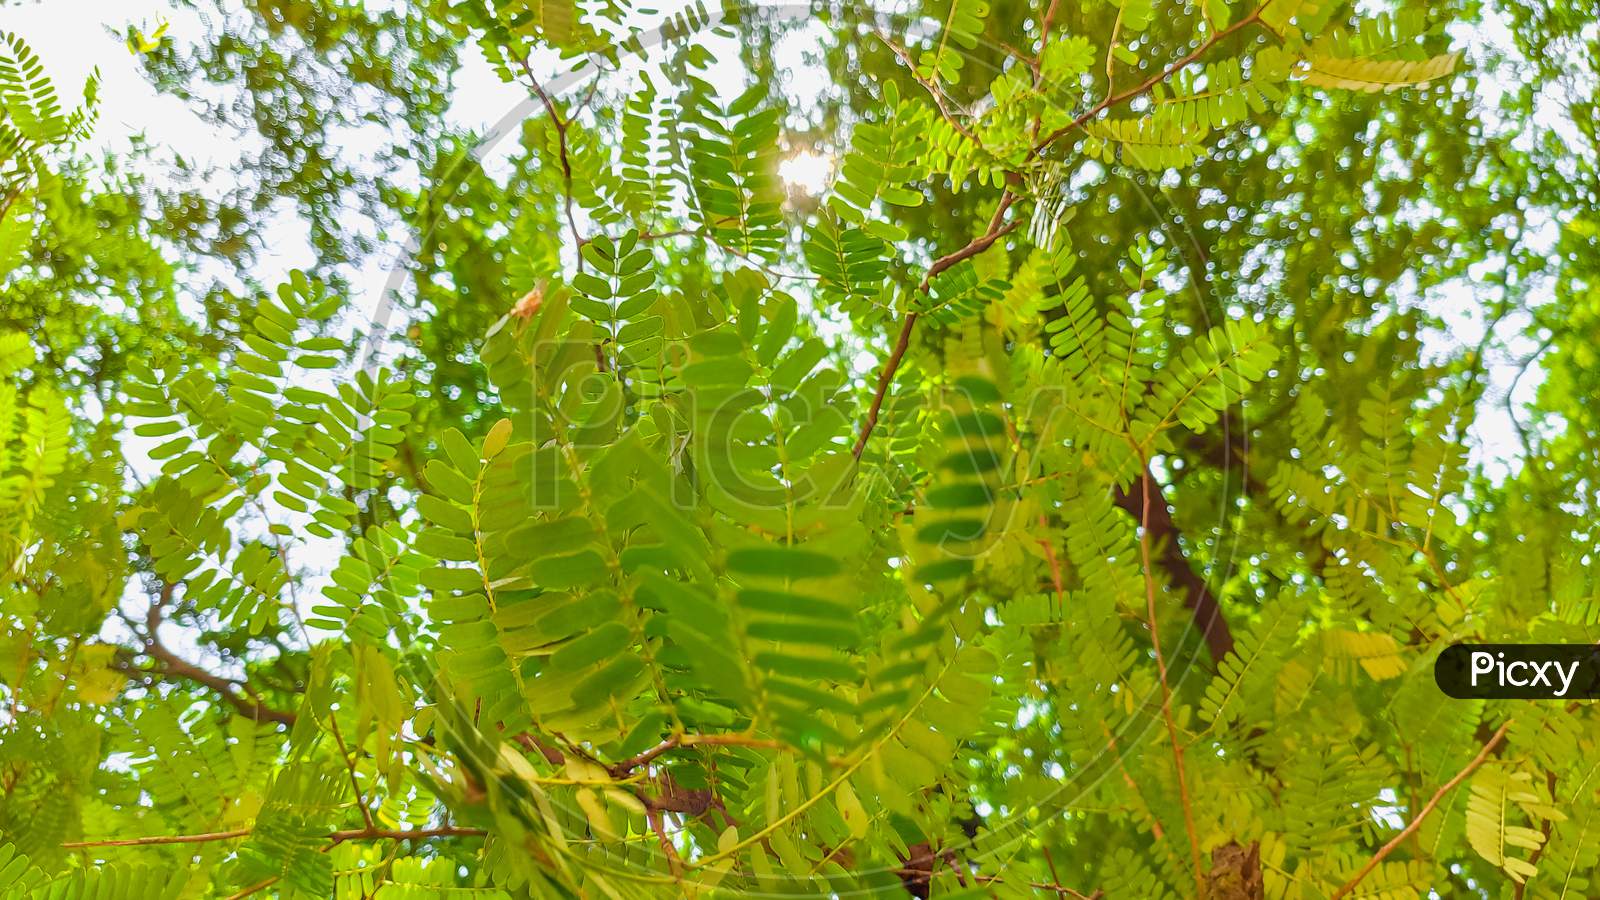 Image Of Small Green Leaves Of Tamarind Tree Yu Picxy